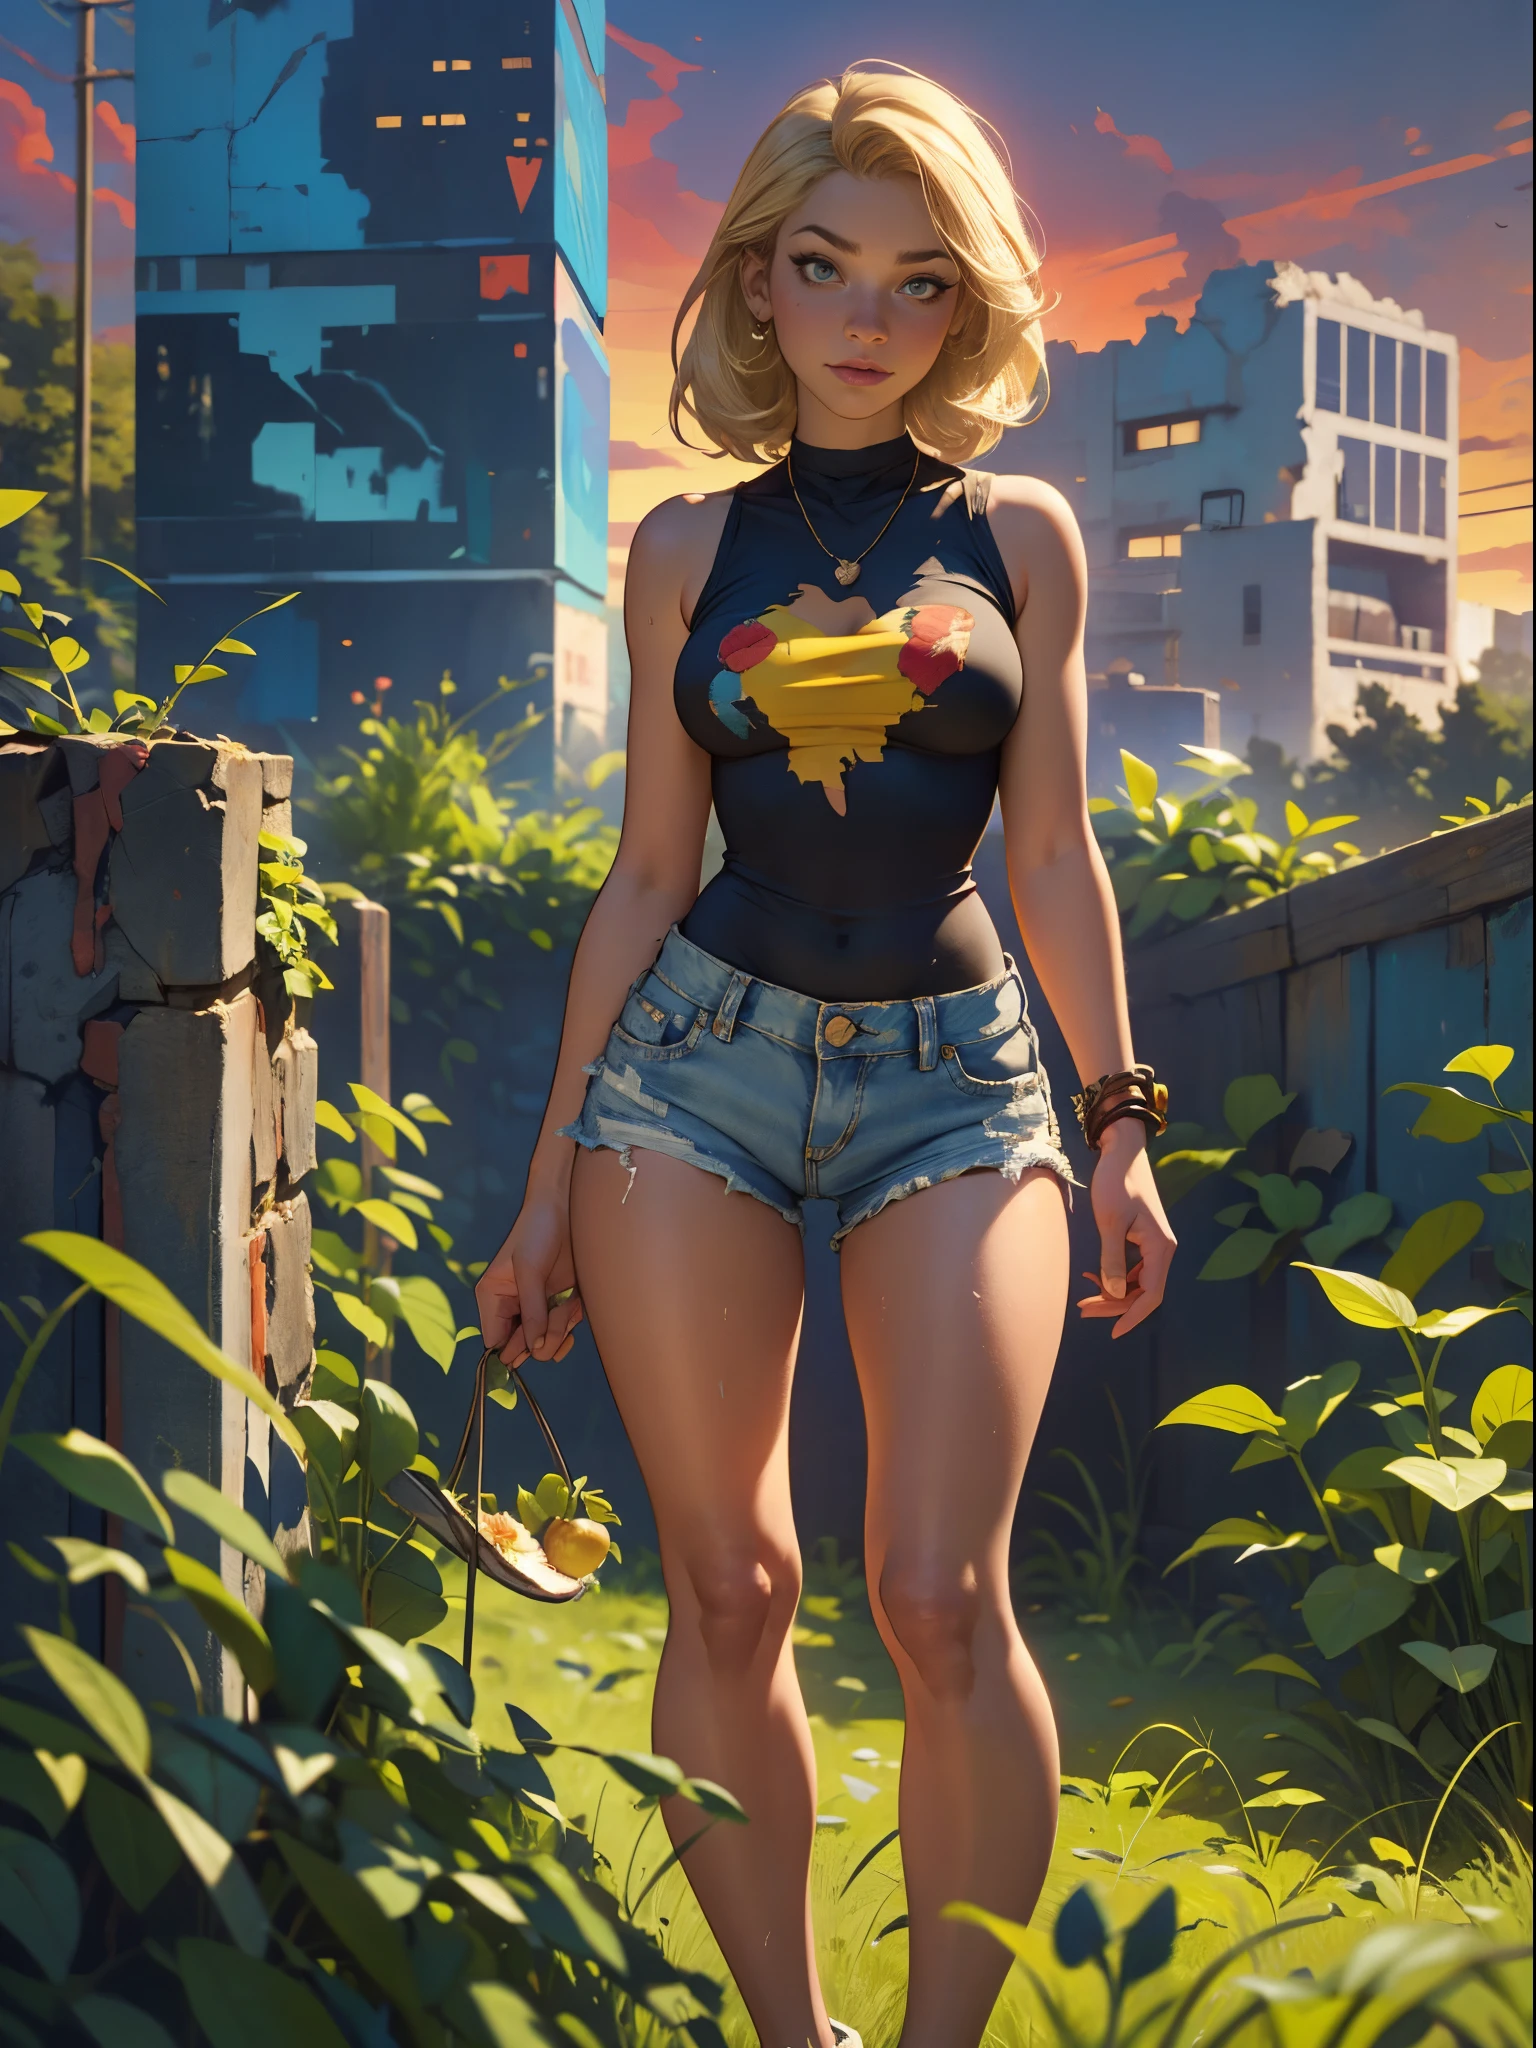 2076 year. The Urban Ruins of the Wasteland, Female huntress picking fruit in the garden, beautiful face, blonde, badly torn shirt and denim shorts ,  long legs, sweating through, sun rising, Nice warm colors, head to toe, full body shot, pretty hands, perfect fingers,